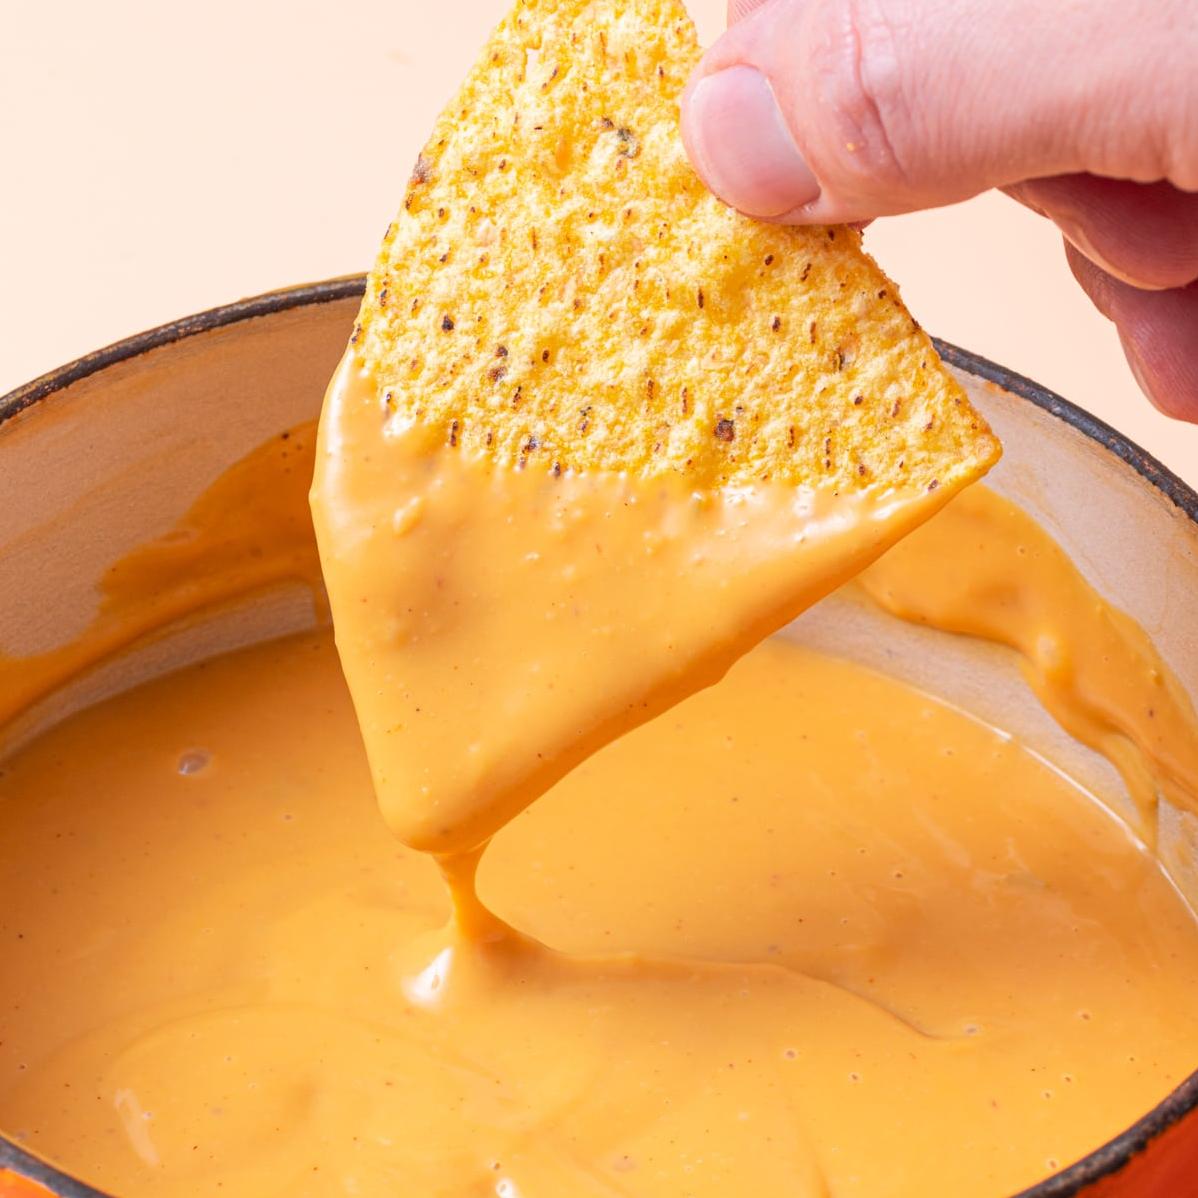  Our vegan nacho cheese is great for entertaining guests, no one will know it's vegan!